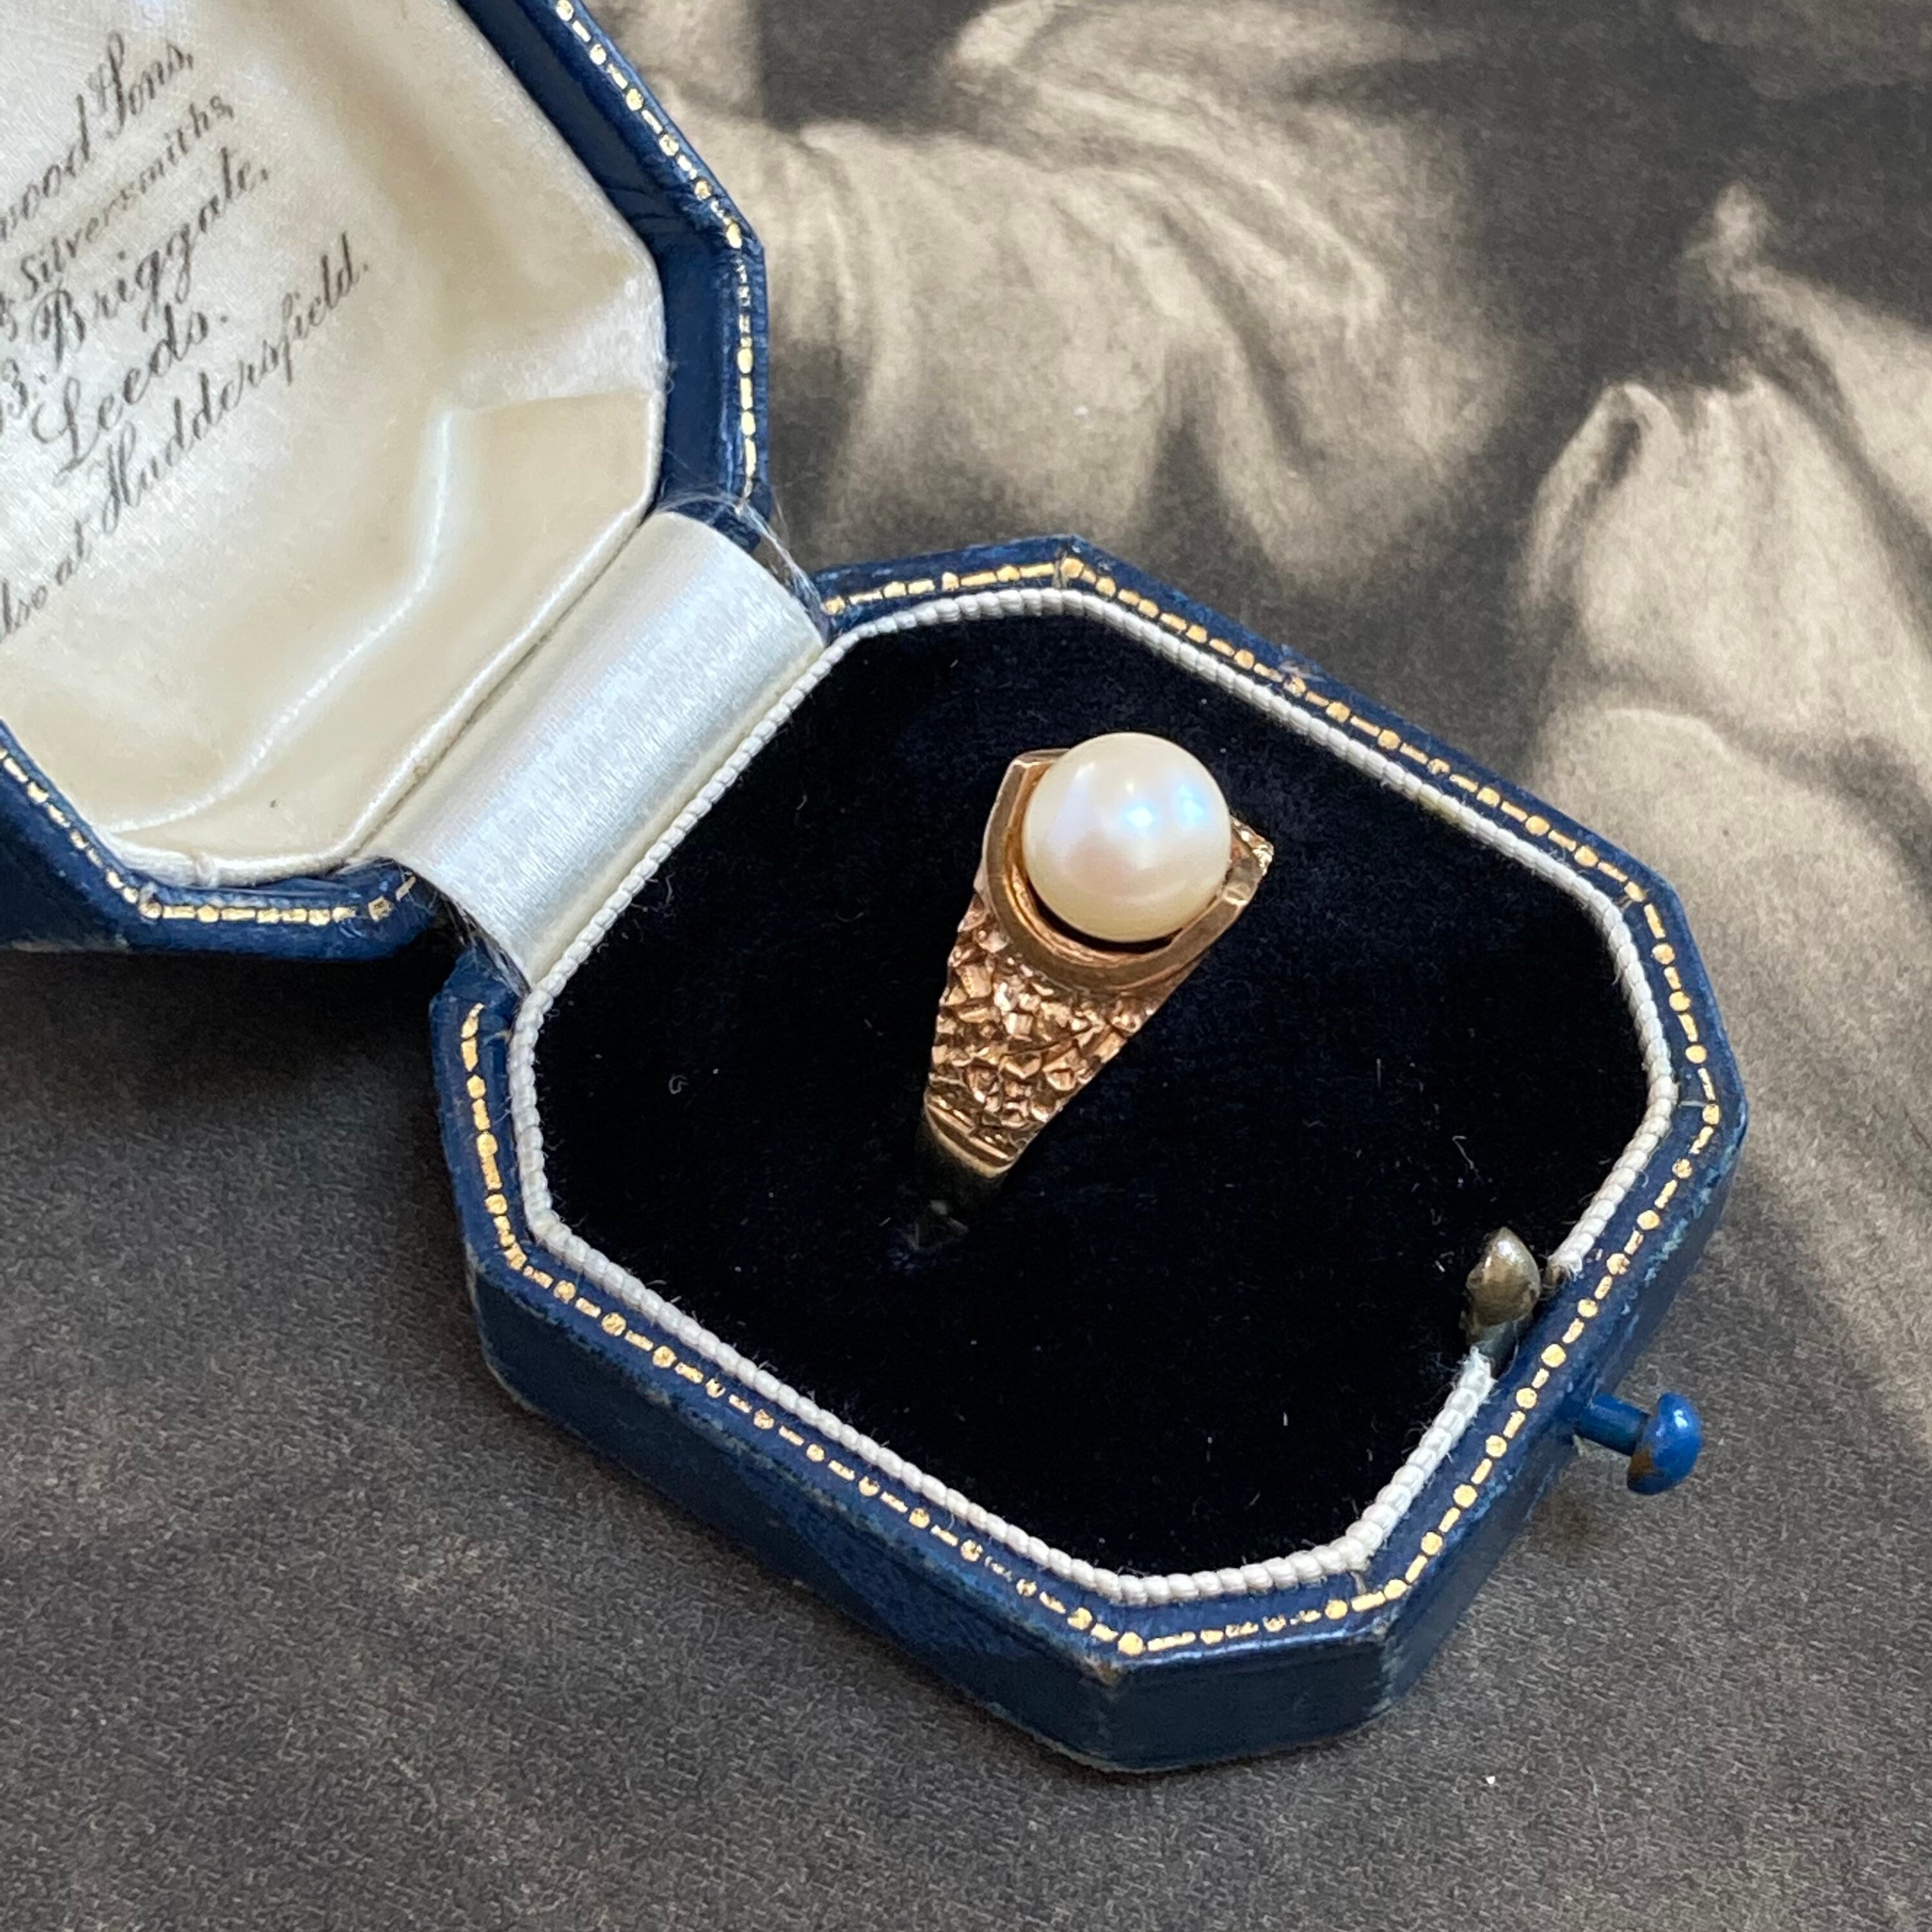 This Vintage Georg Jensen Gold Ring Featuring A Wonderful Pearl Set in 9Ct With Full English Hallmarks Would Make Lovely Gift